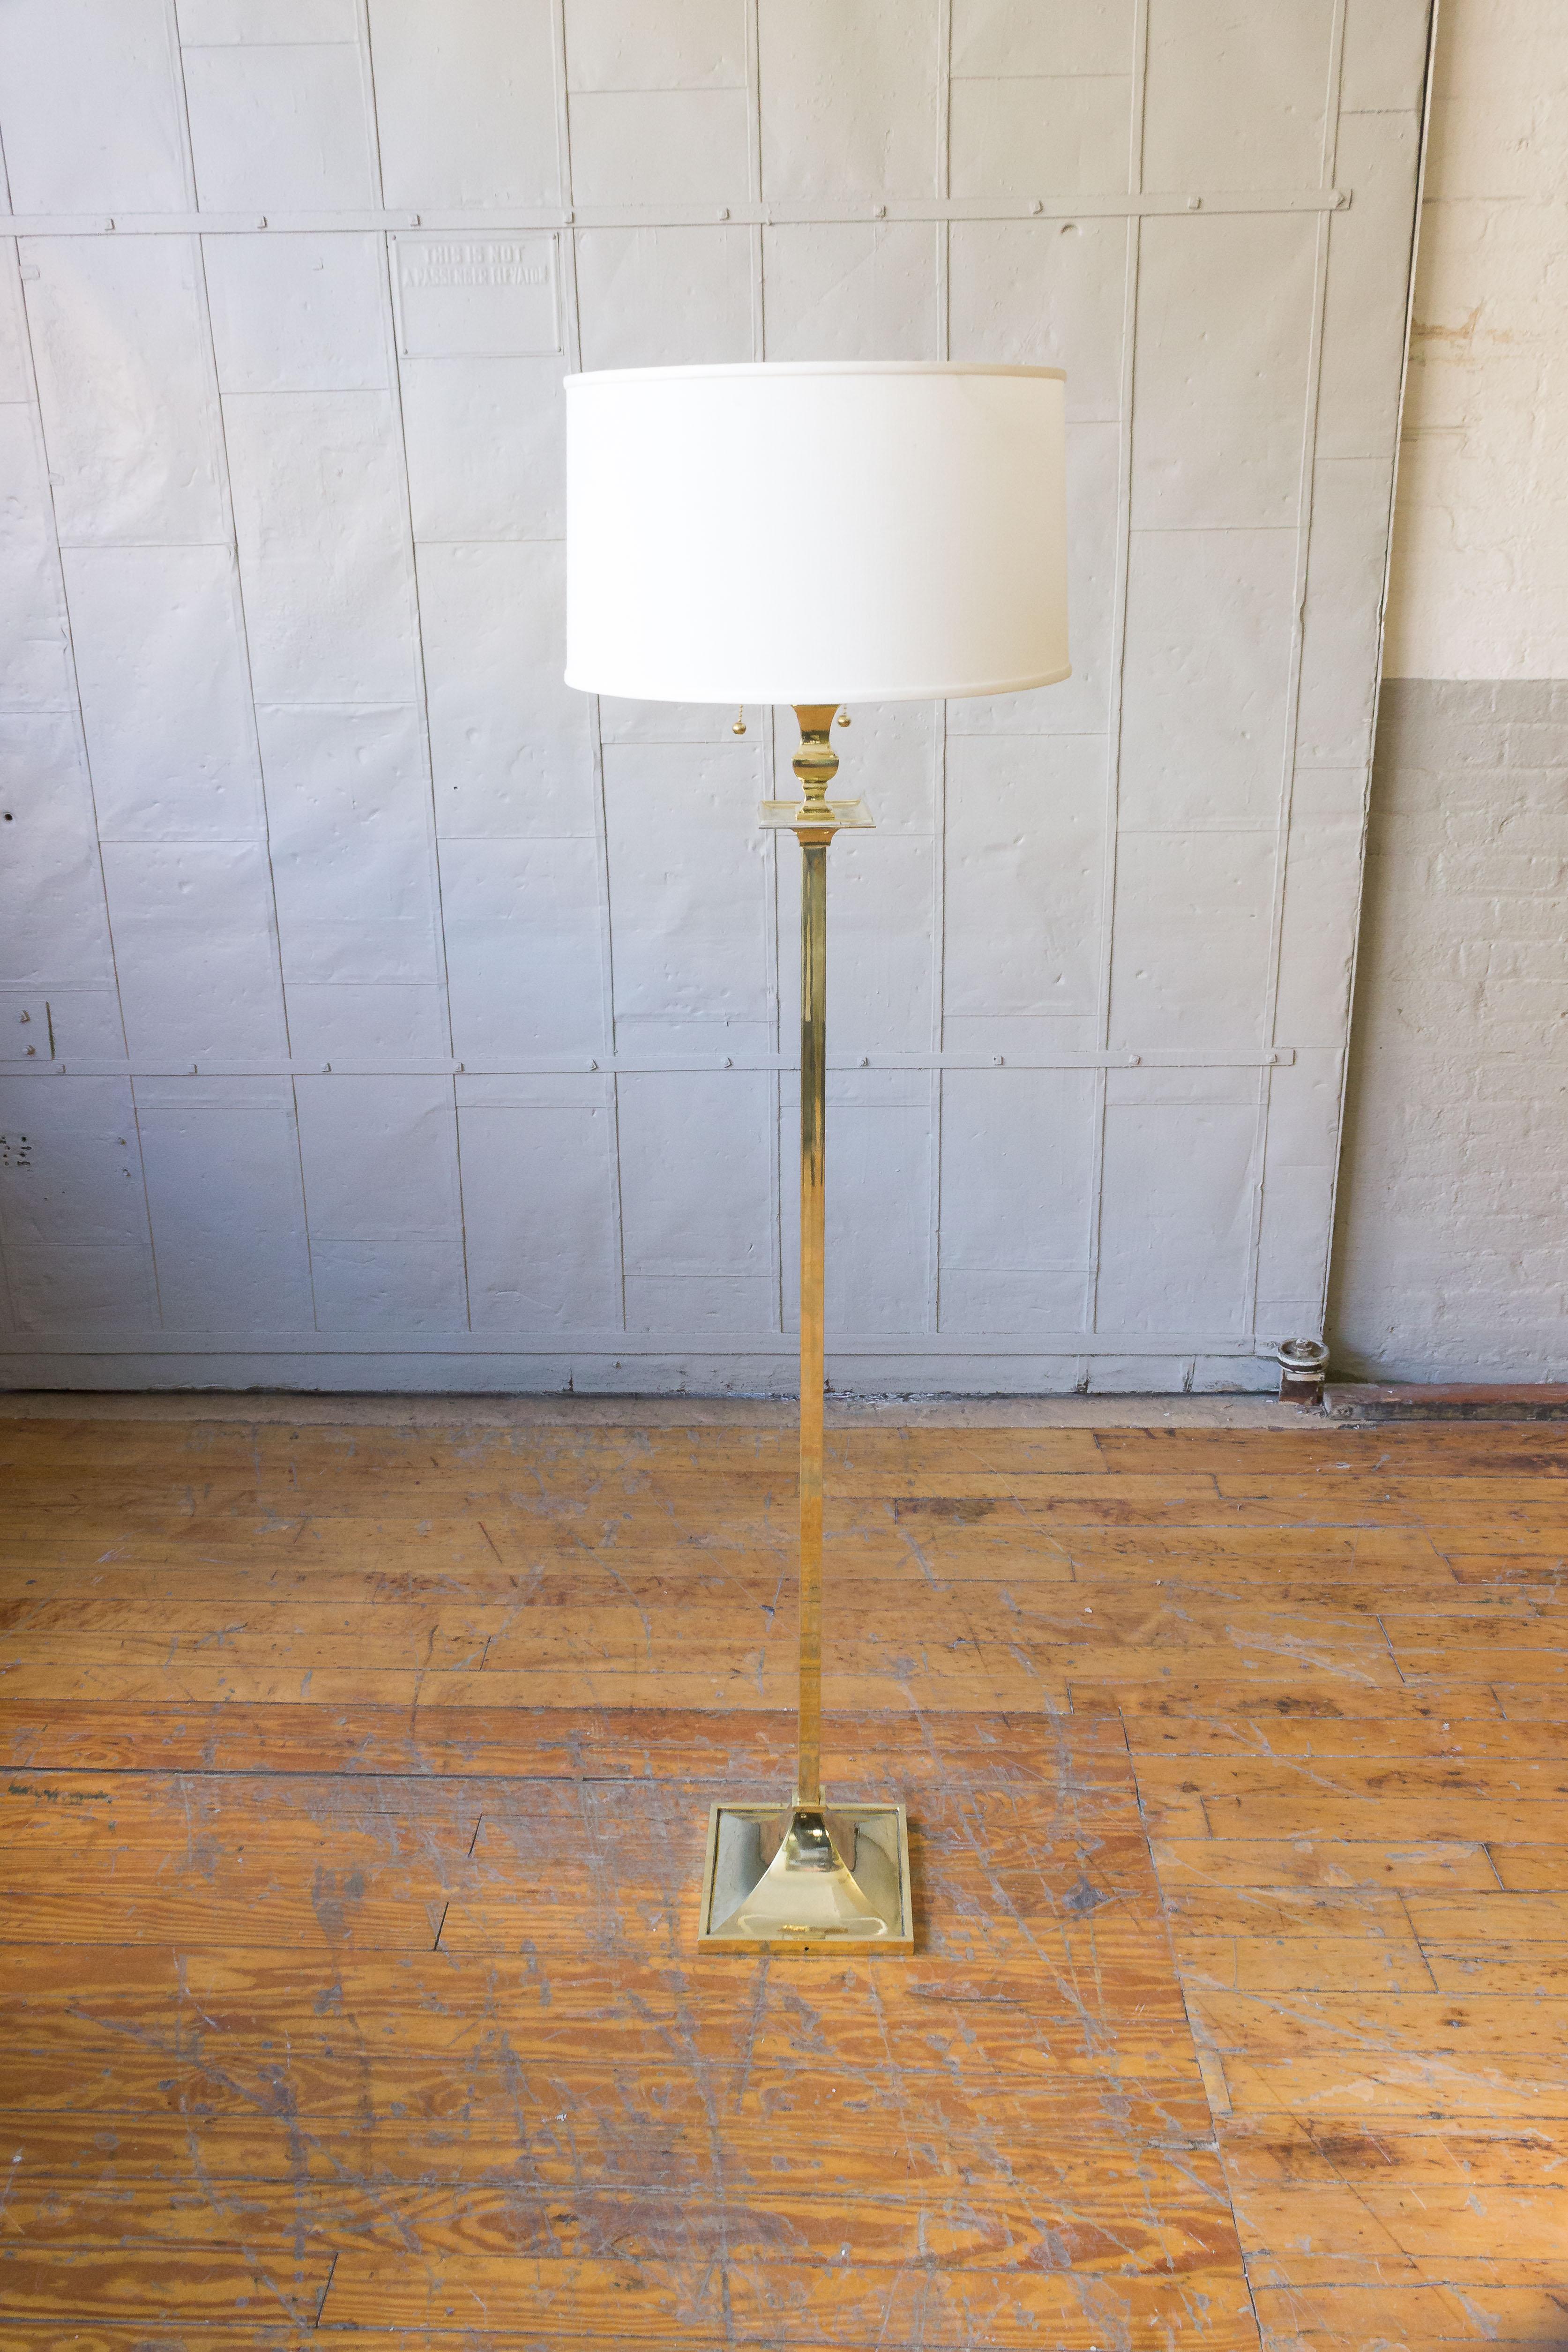 Pair of brass floor lamps with square base. Price includes polishing or plating and new wiring. Please allow 2 to 3 weeks for completion. Not sold with shade (photographed with 10 inch height x 18 inch diameter shade).